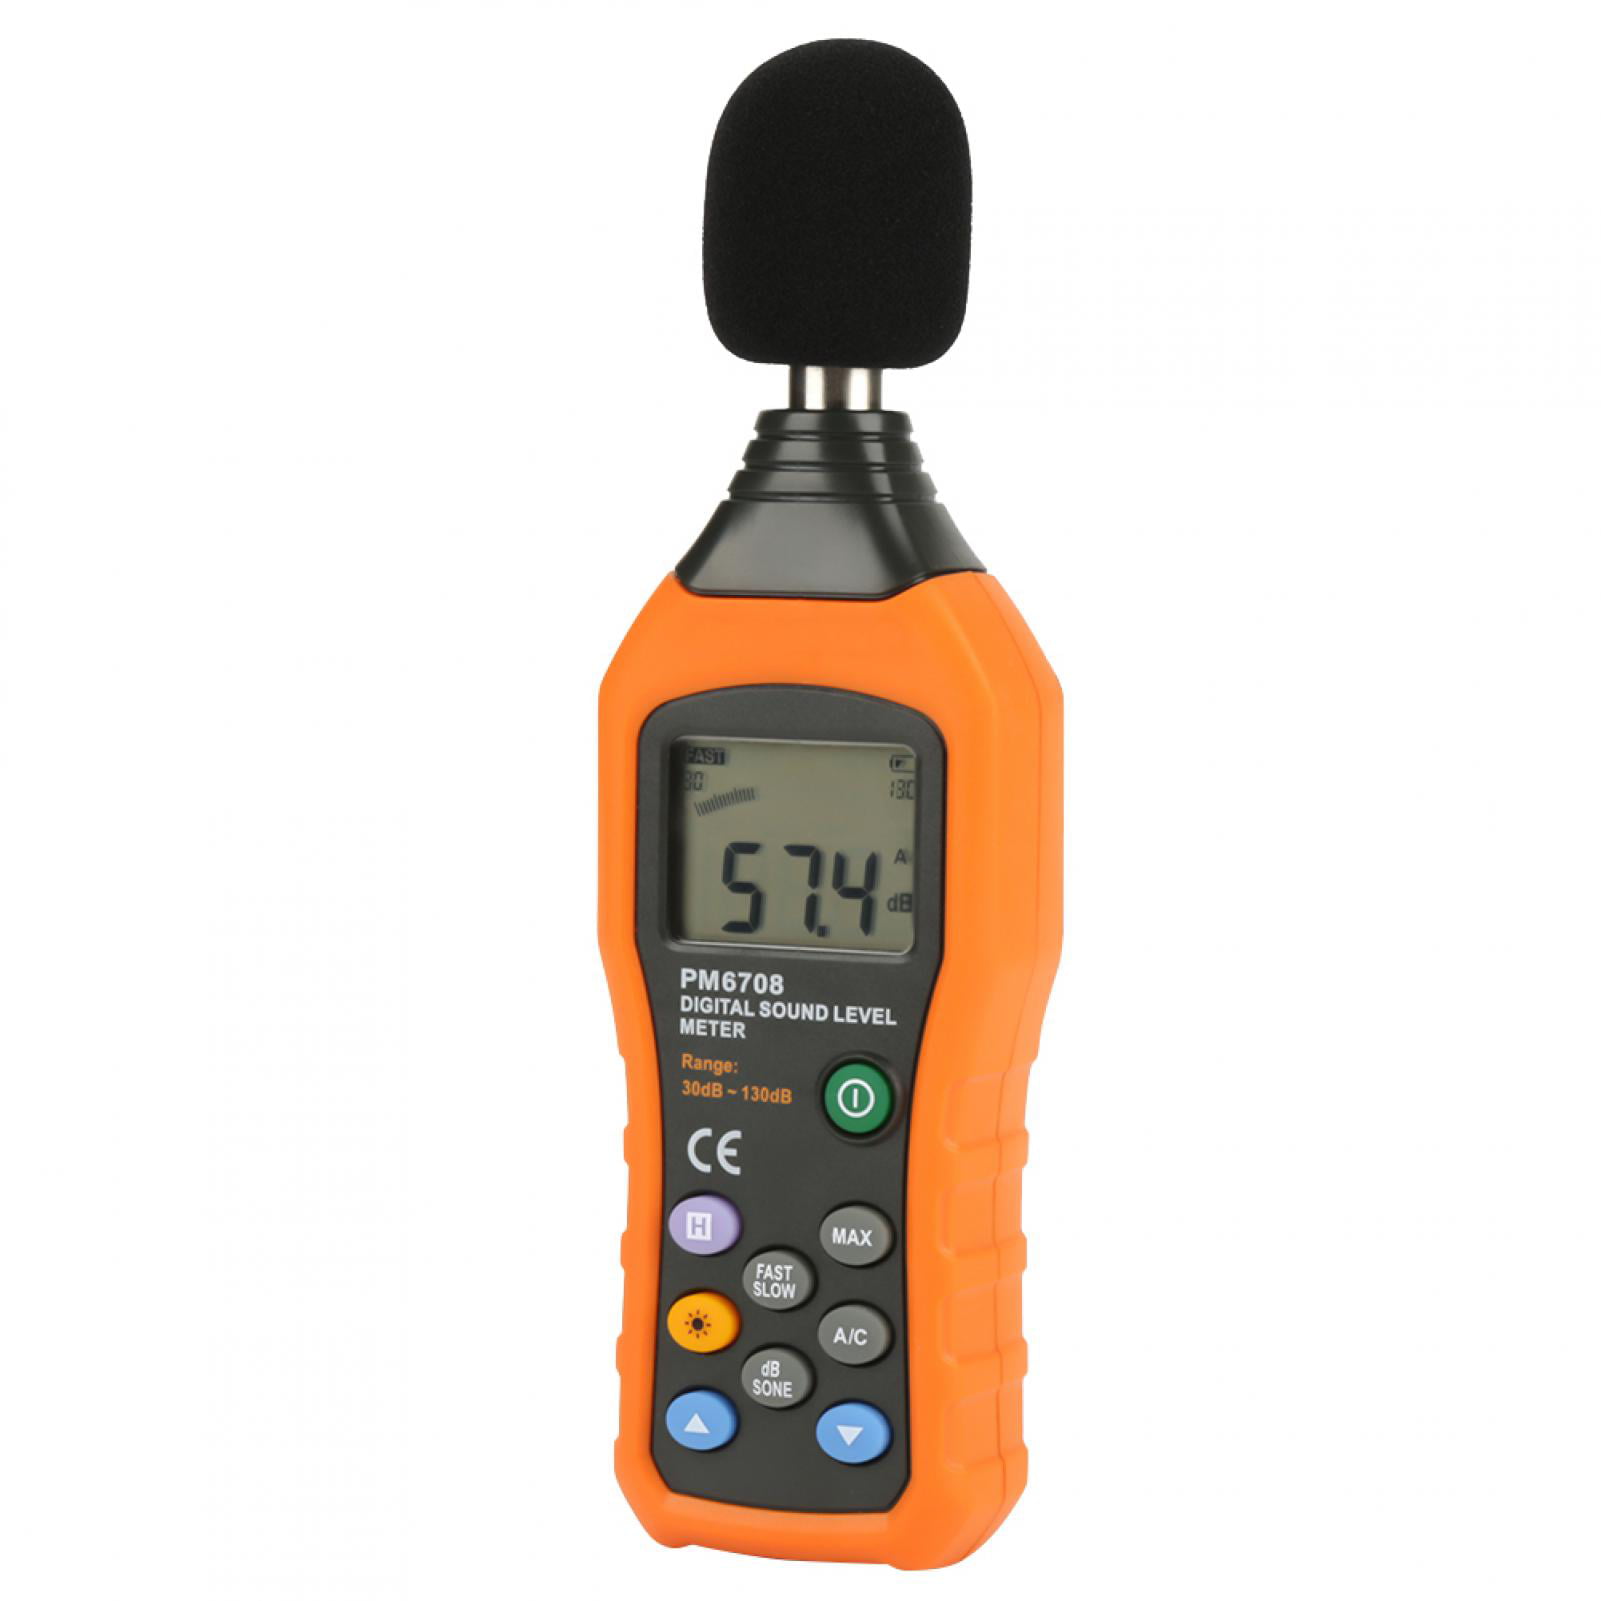 LCD Digital Sound Simulation Audio Decibel Professional Sound Noise High Accuracy Level Meter Data Hold Tester with Measuring Range 30 to 130dB PM6708